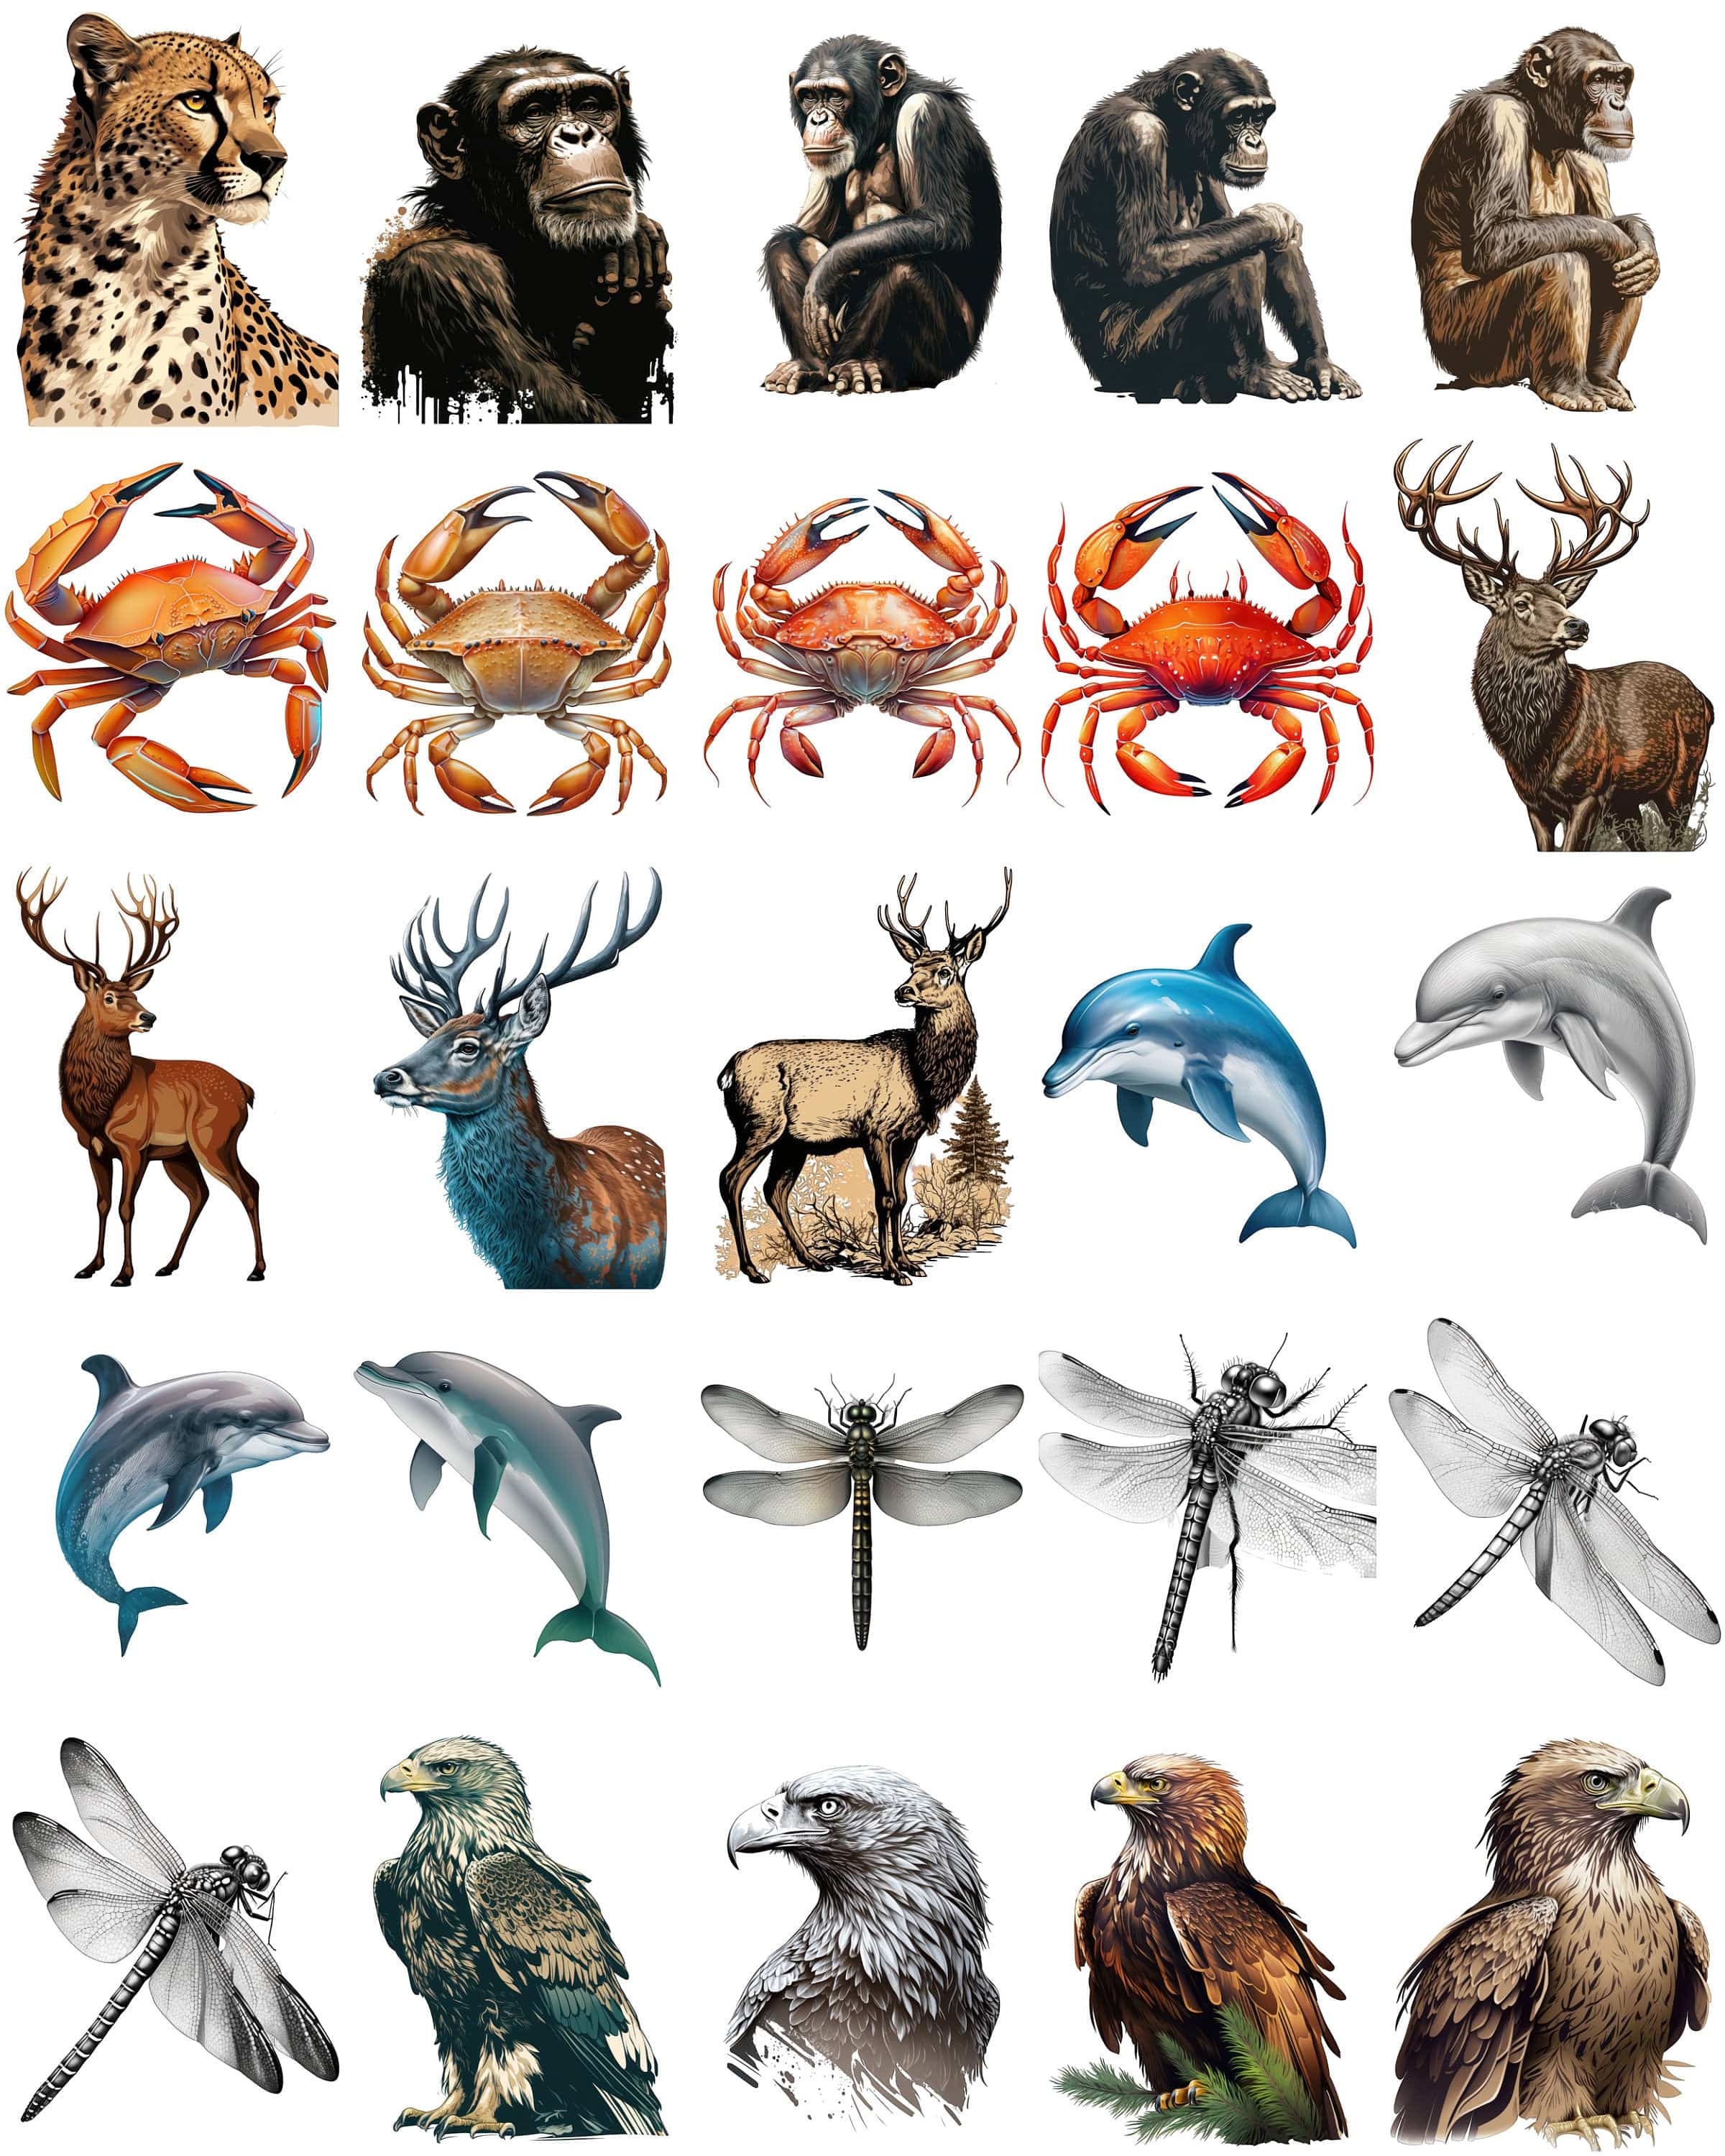 Make your designs come alive with our transparent animal set of 230 wildlife graphics, including jungle creature animals, Commercial use Digital Download Sumobundle